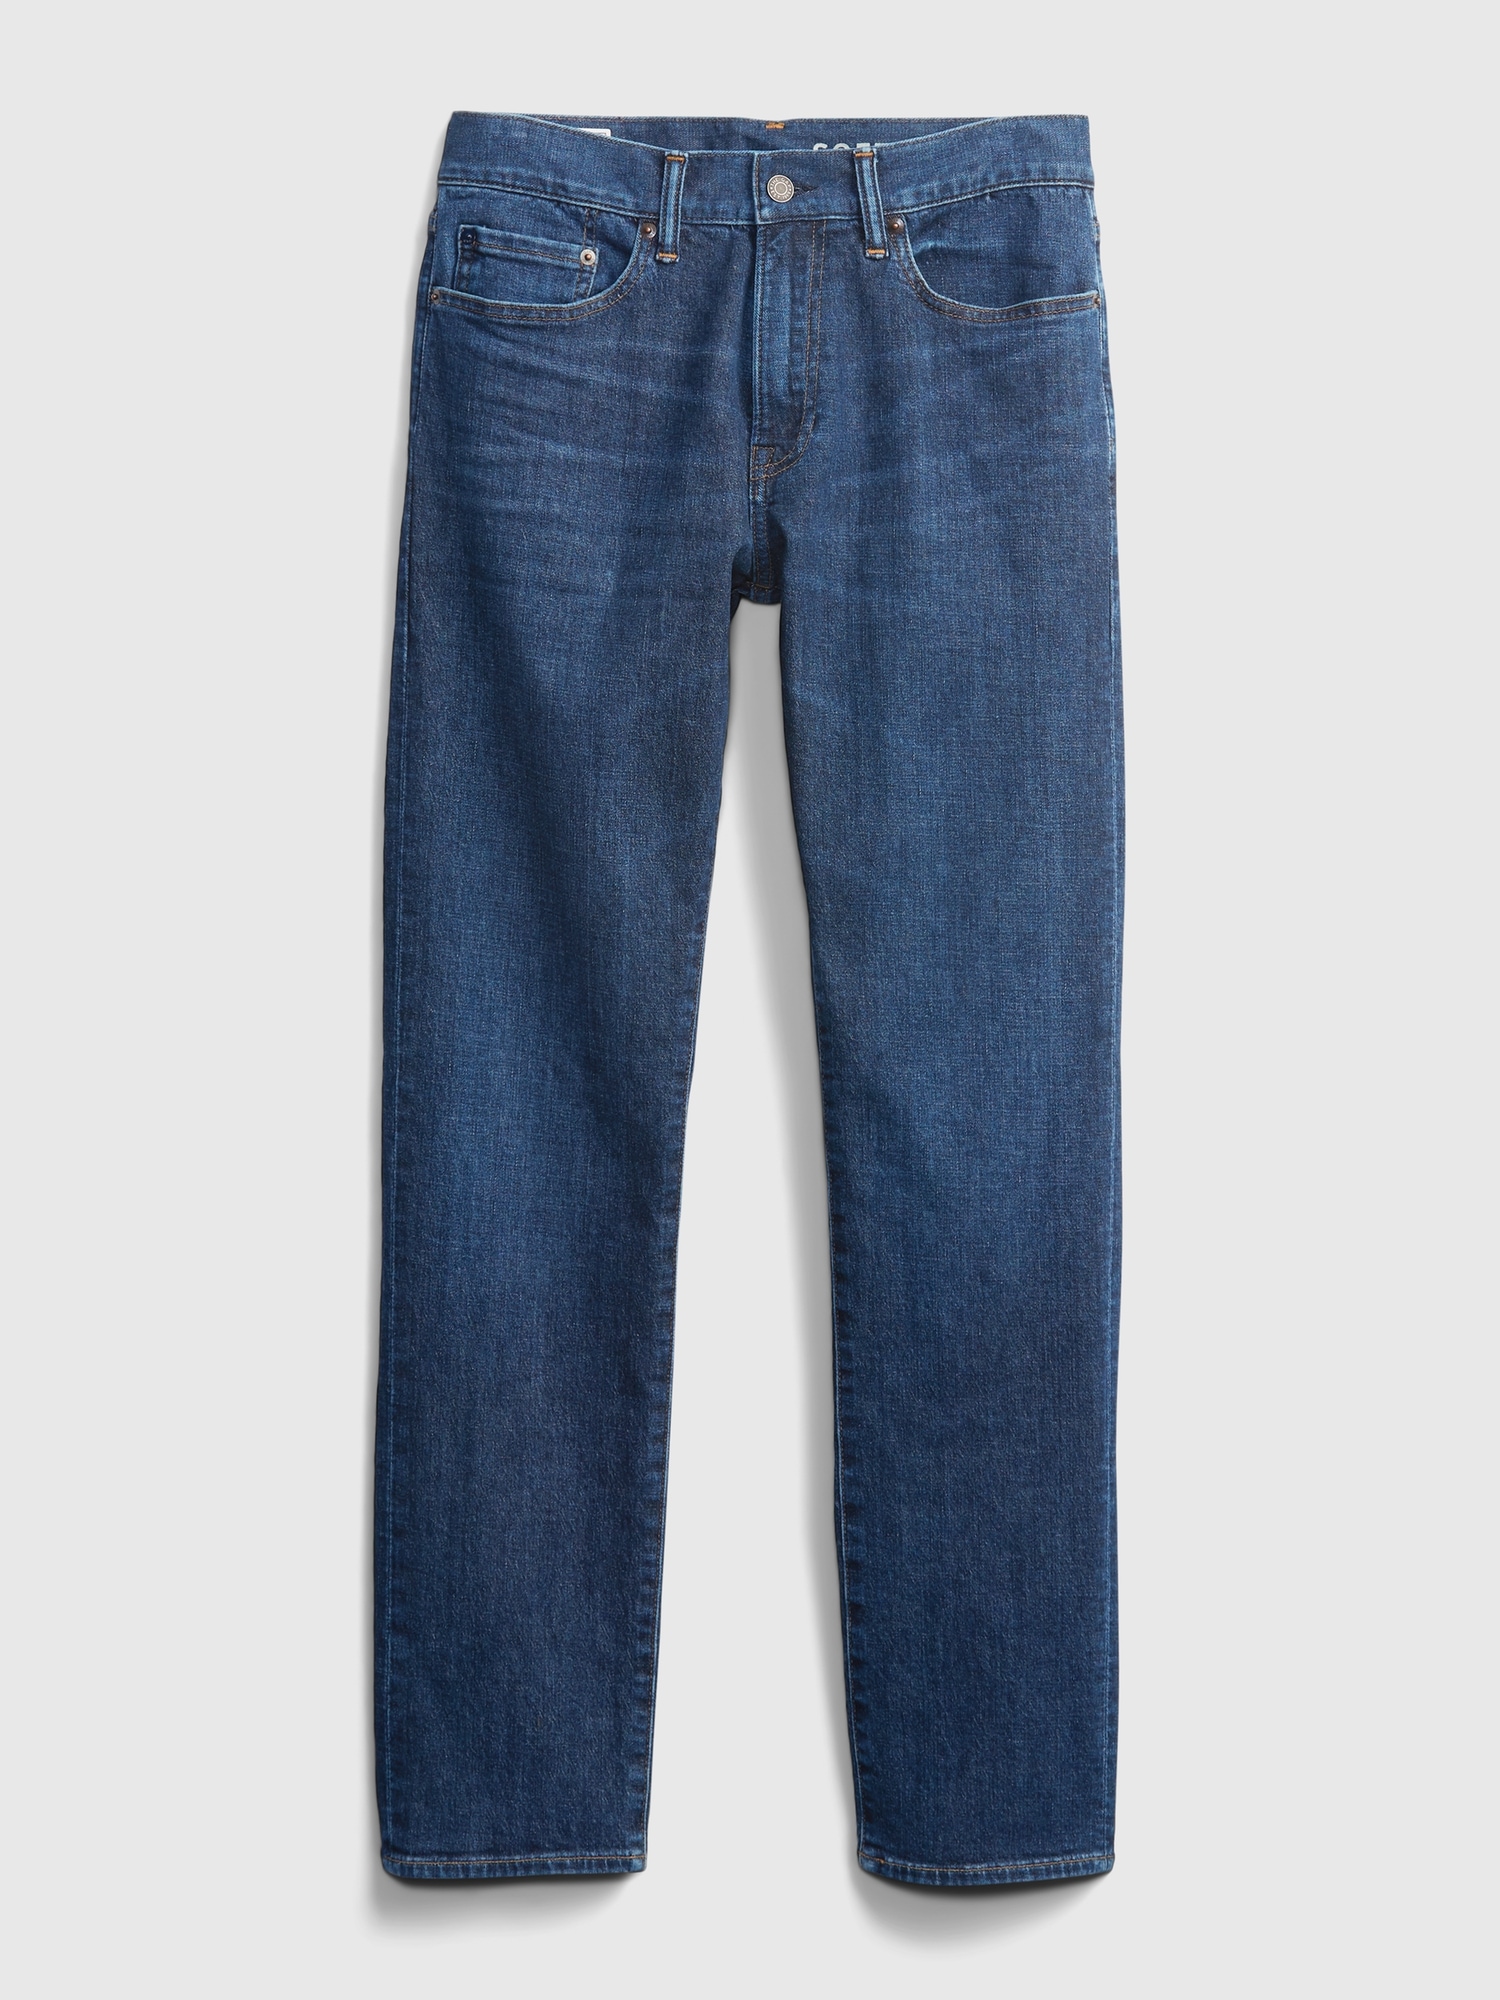 GAP Men's Classic Everyday Straight Denim Jeans in GapFlex with Washwell